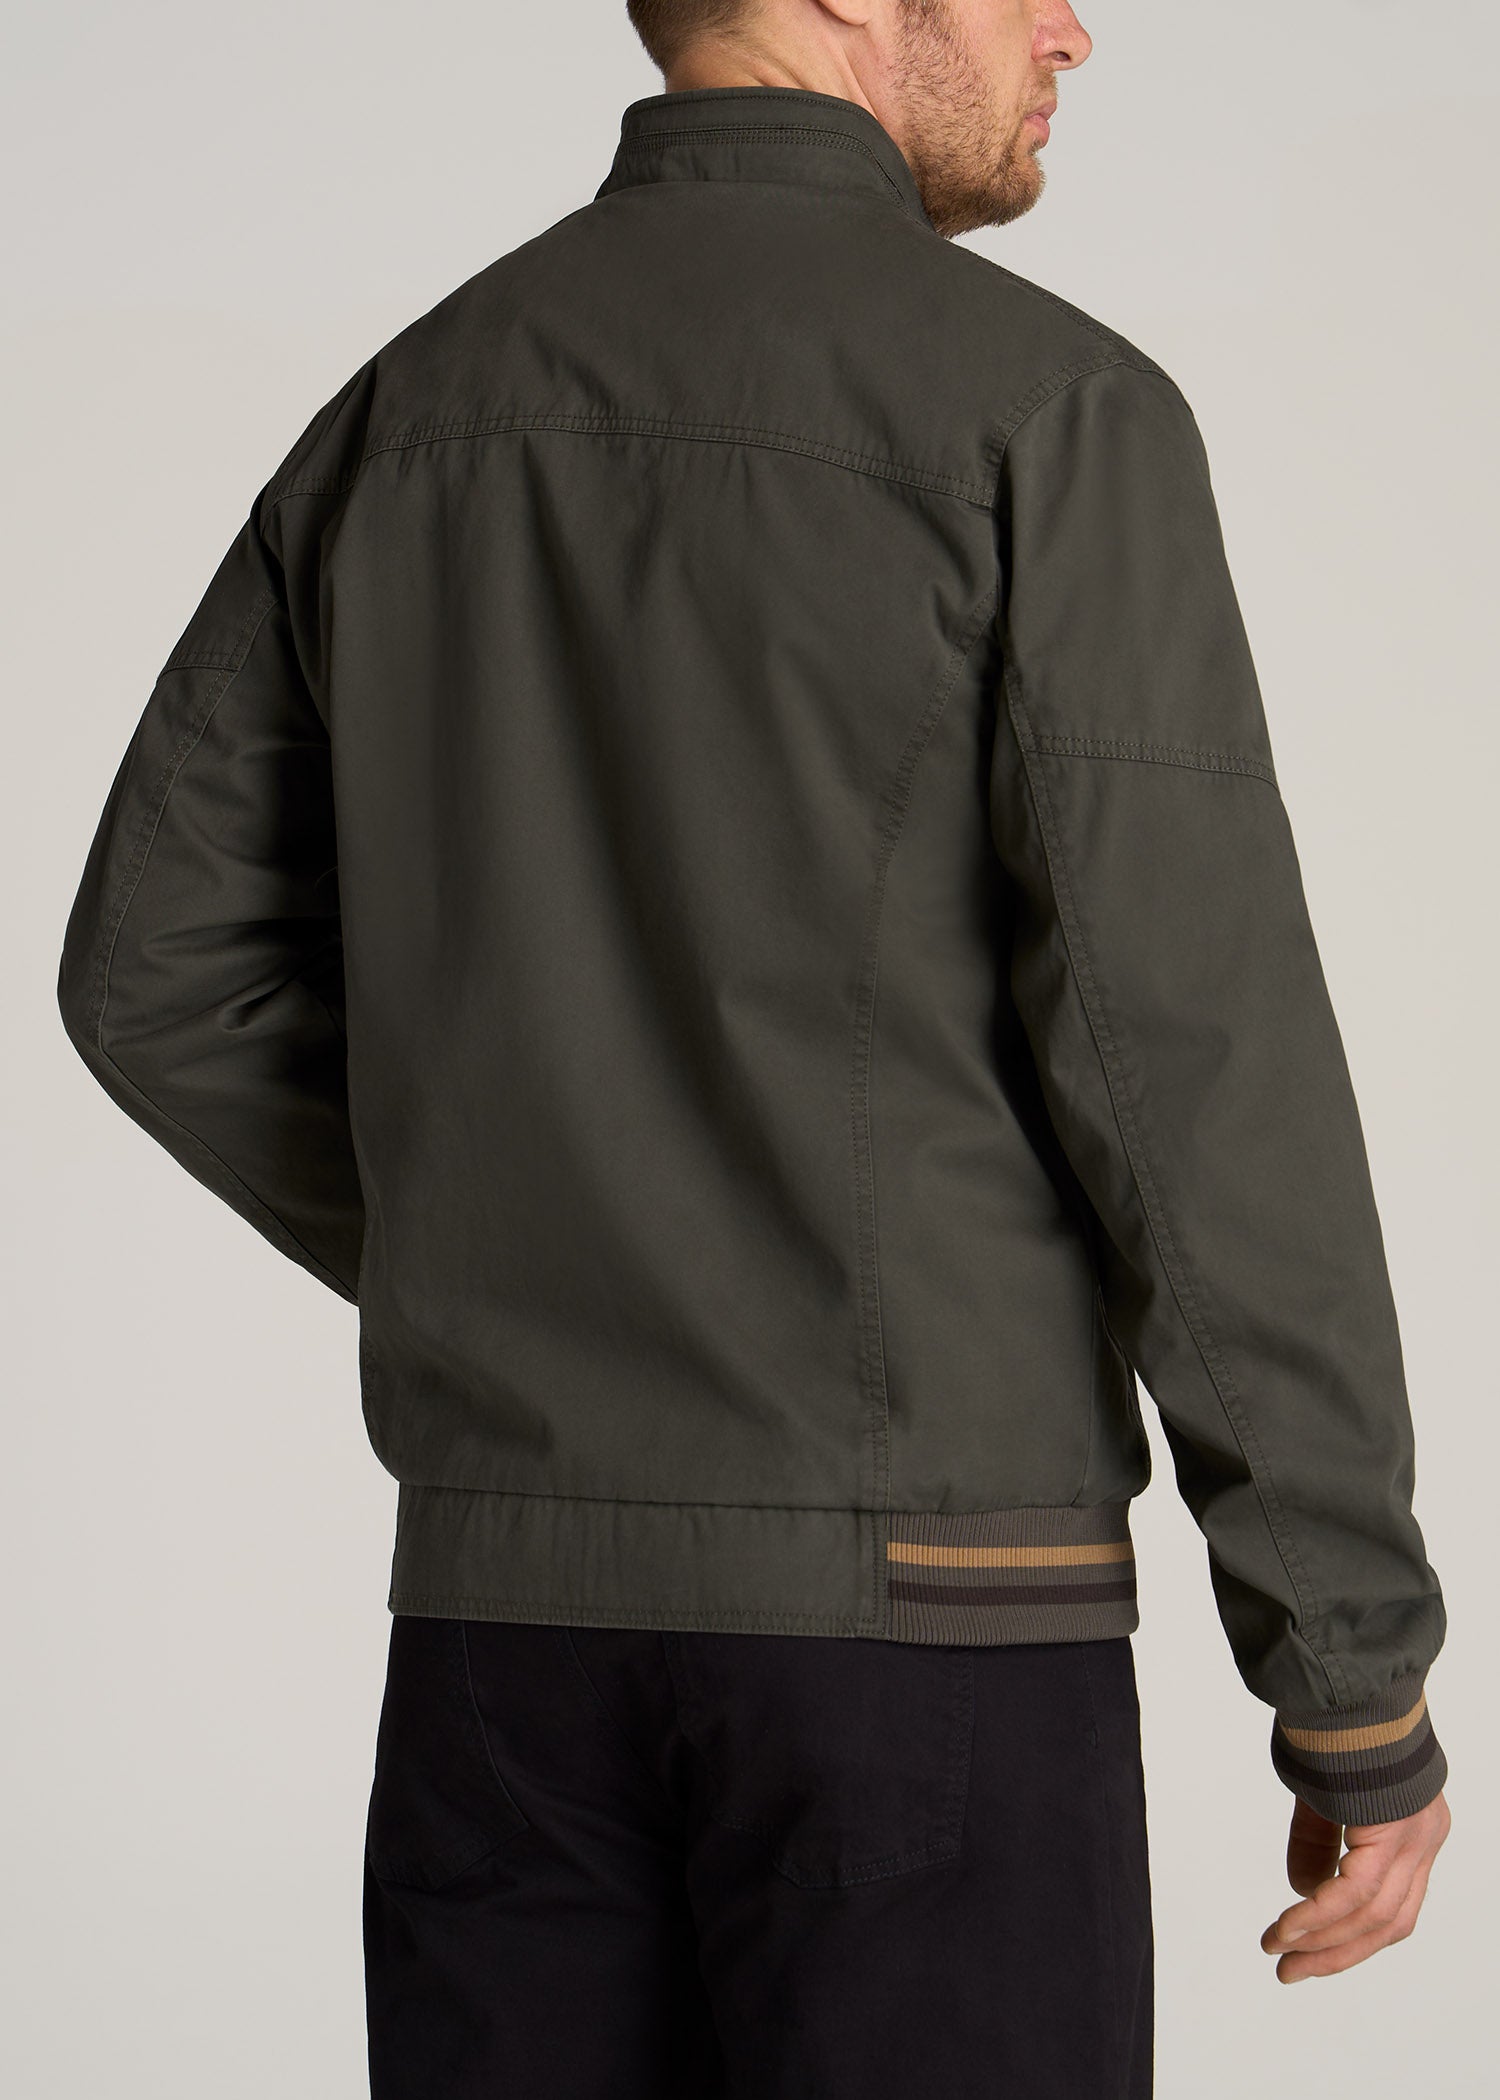 Mens Cotton Green Quilted Bomber Jacket - Jacketpop